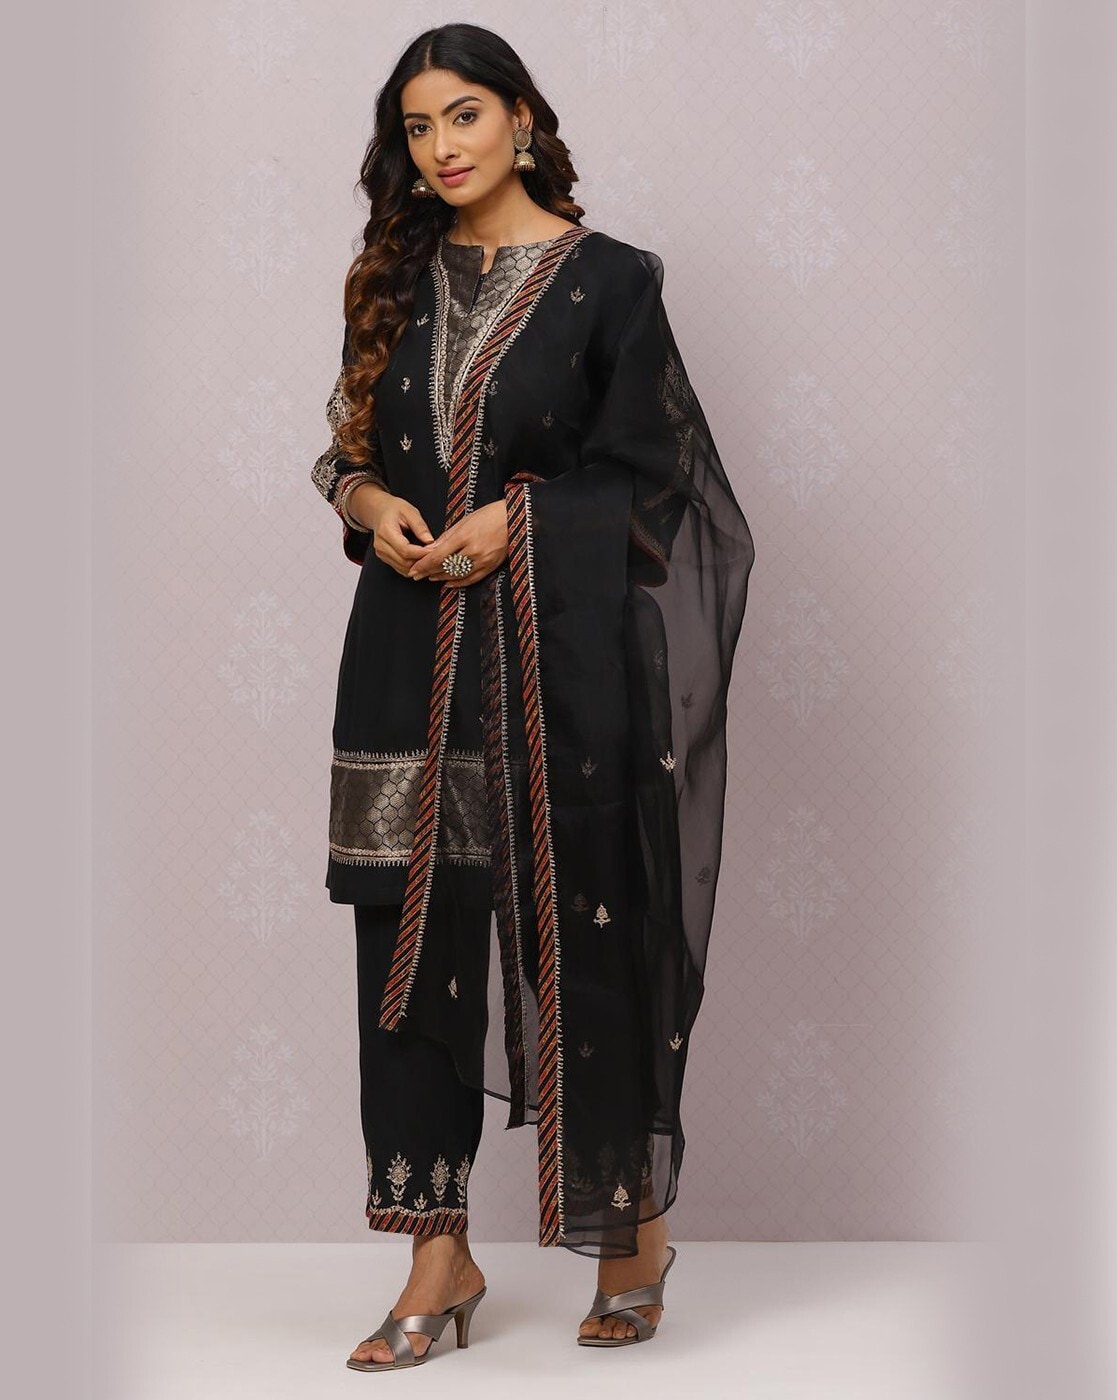 Buy BIBA Black Cotton Anarkali Suit Online at Low Prices in India -  Paytmmall.com